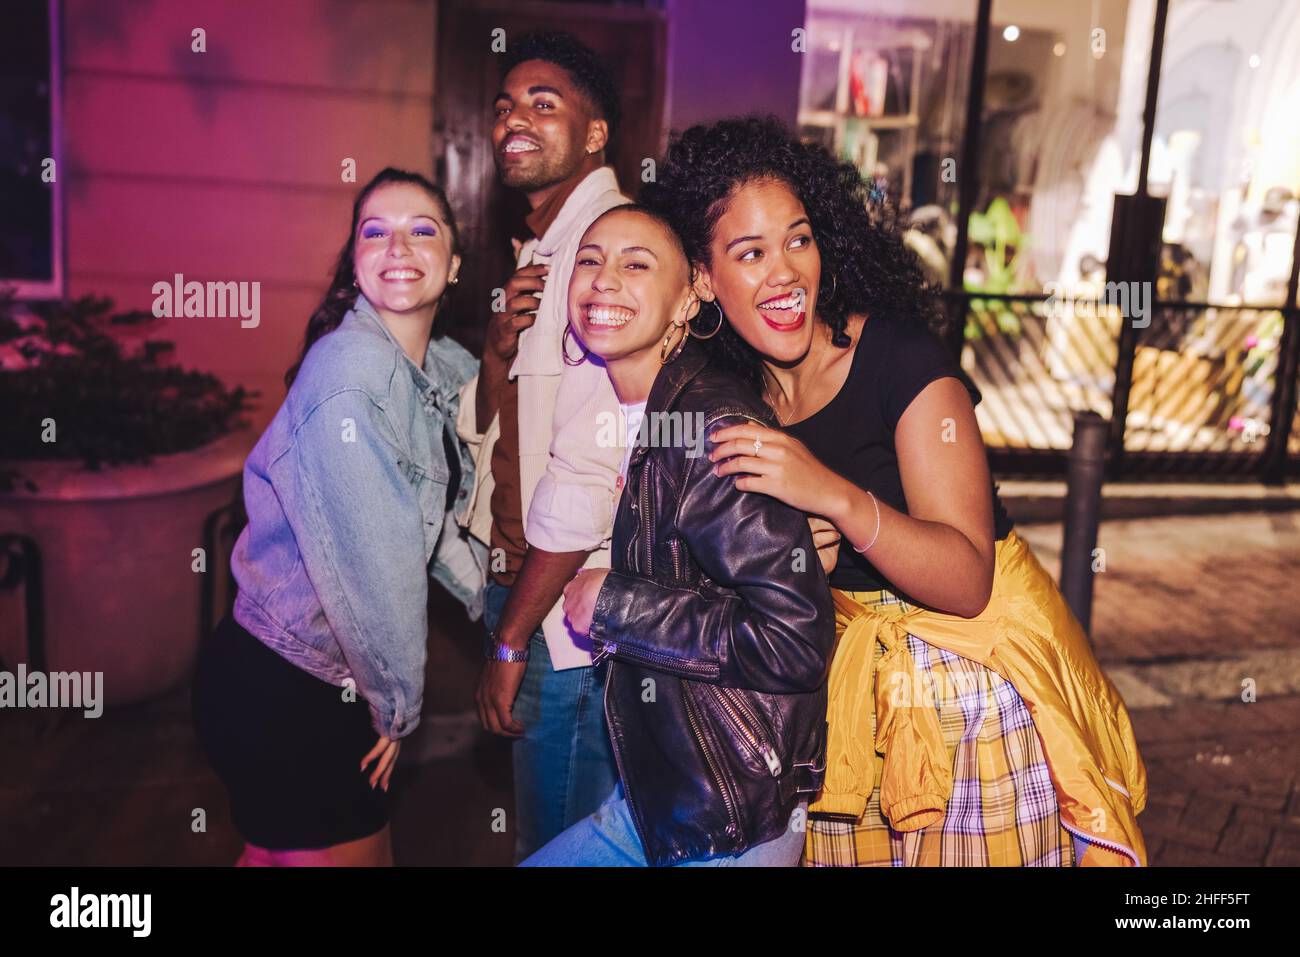 City friends having a good time outdoors. Group of multicultural young people smiling happily while standing together at night. Cheerful friends hangi Stock Photo